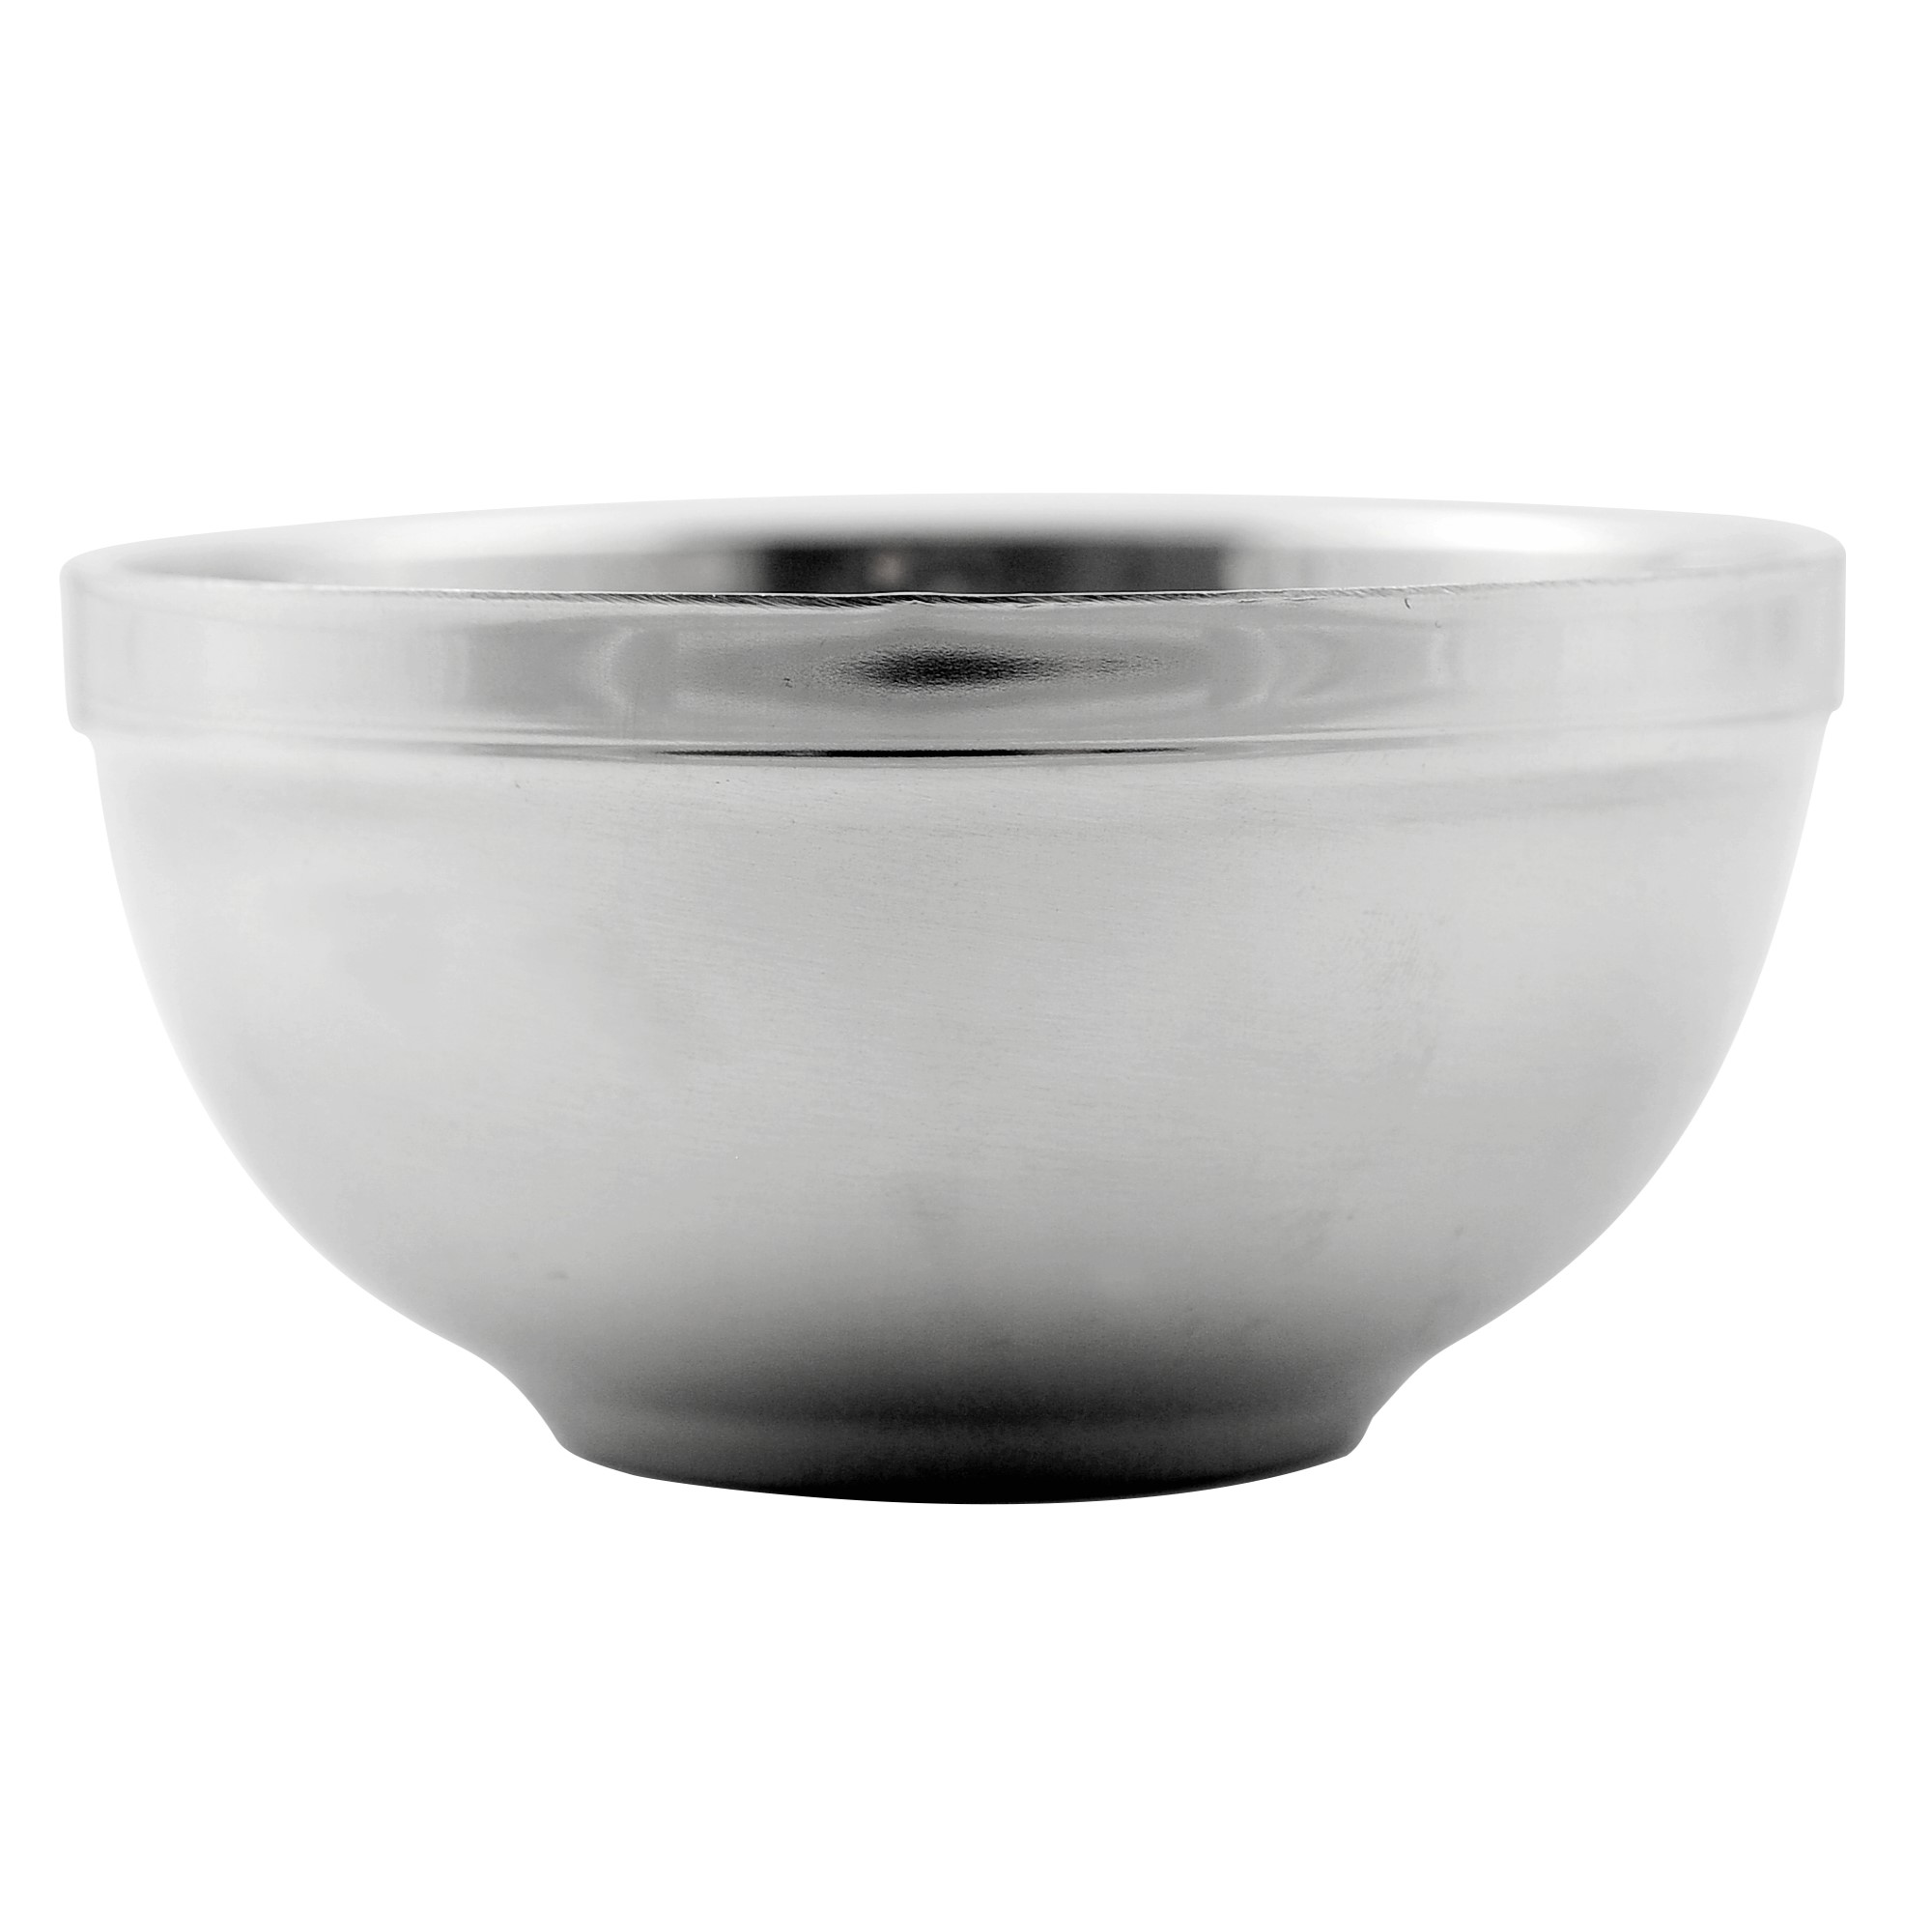 Double-layer insulation bowl 11.5CM, , large